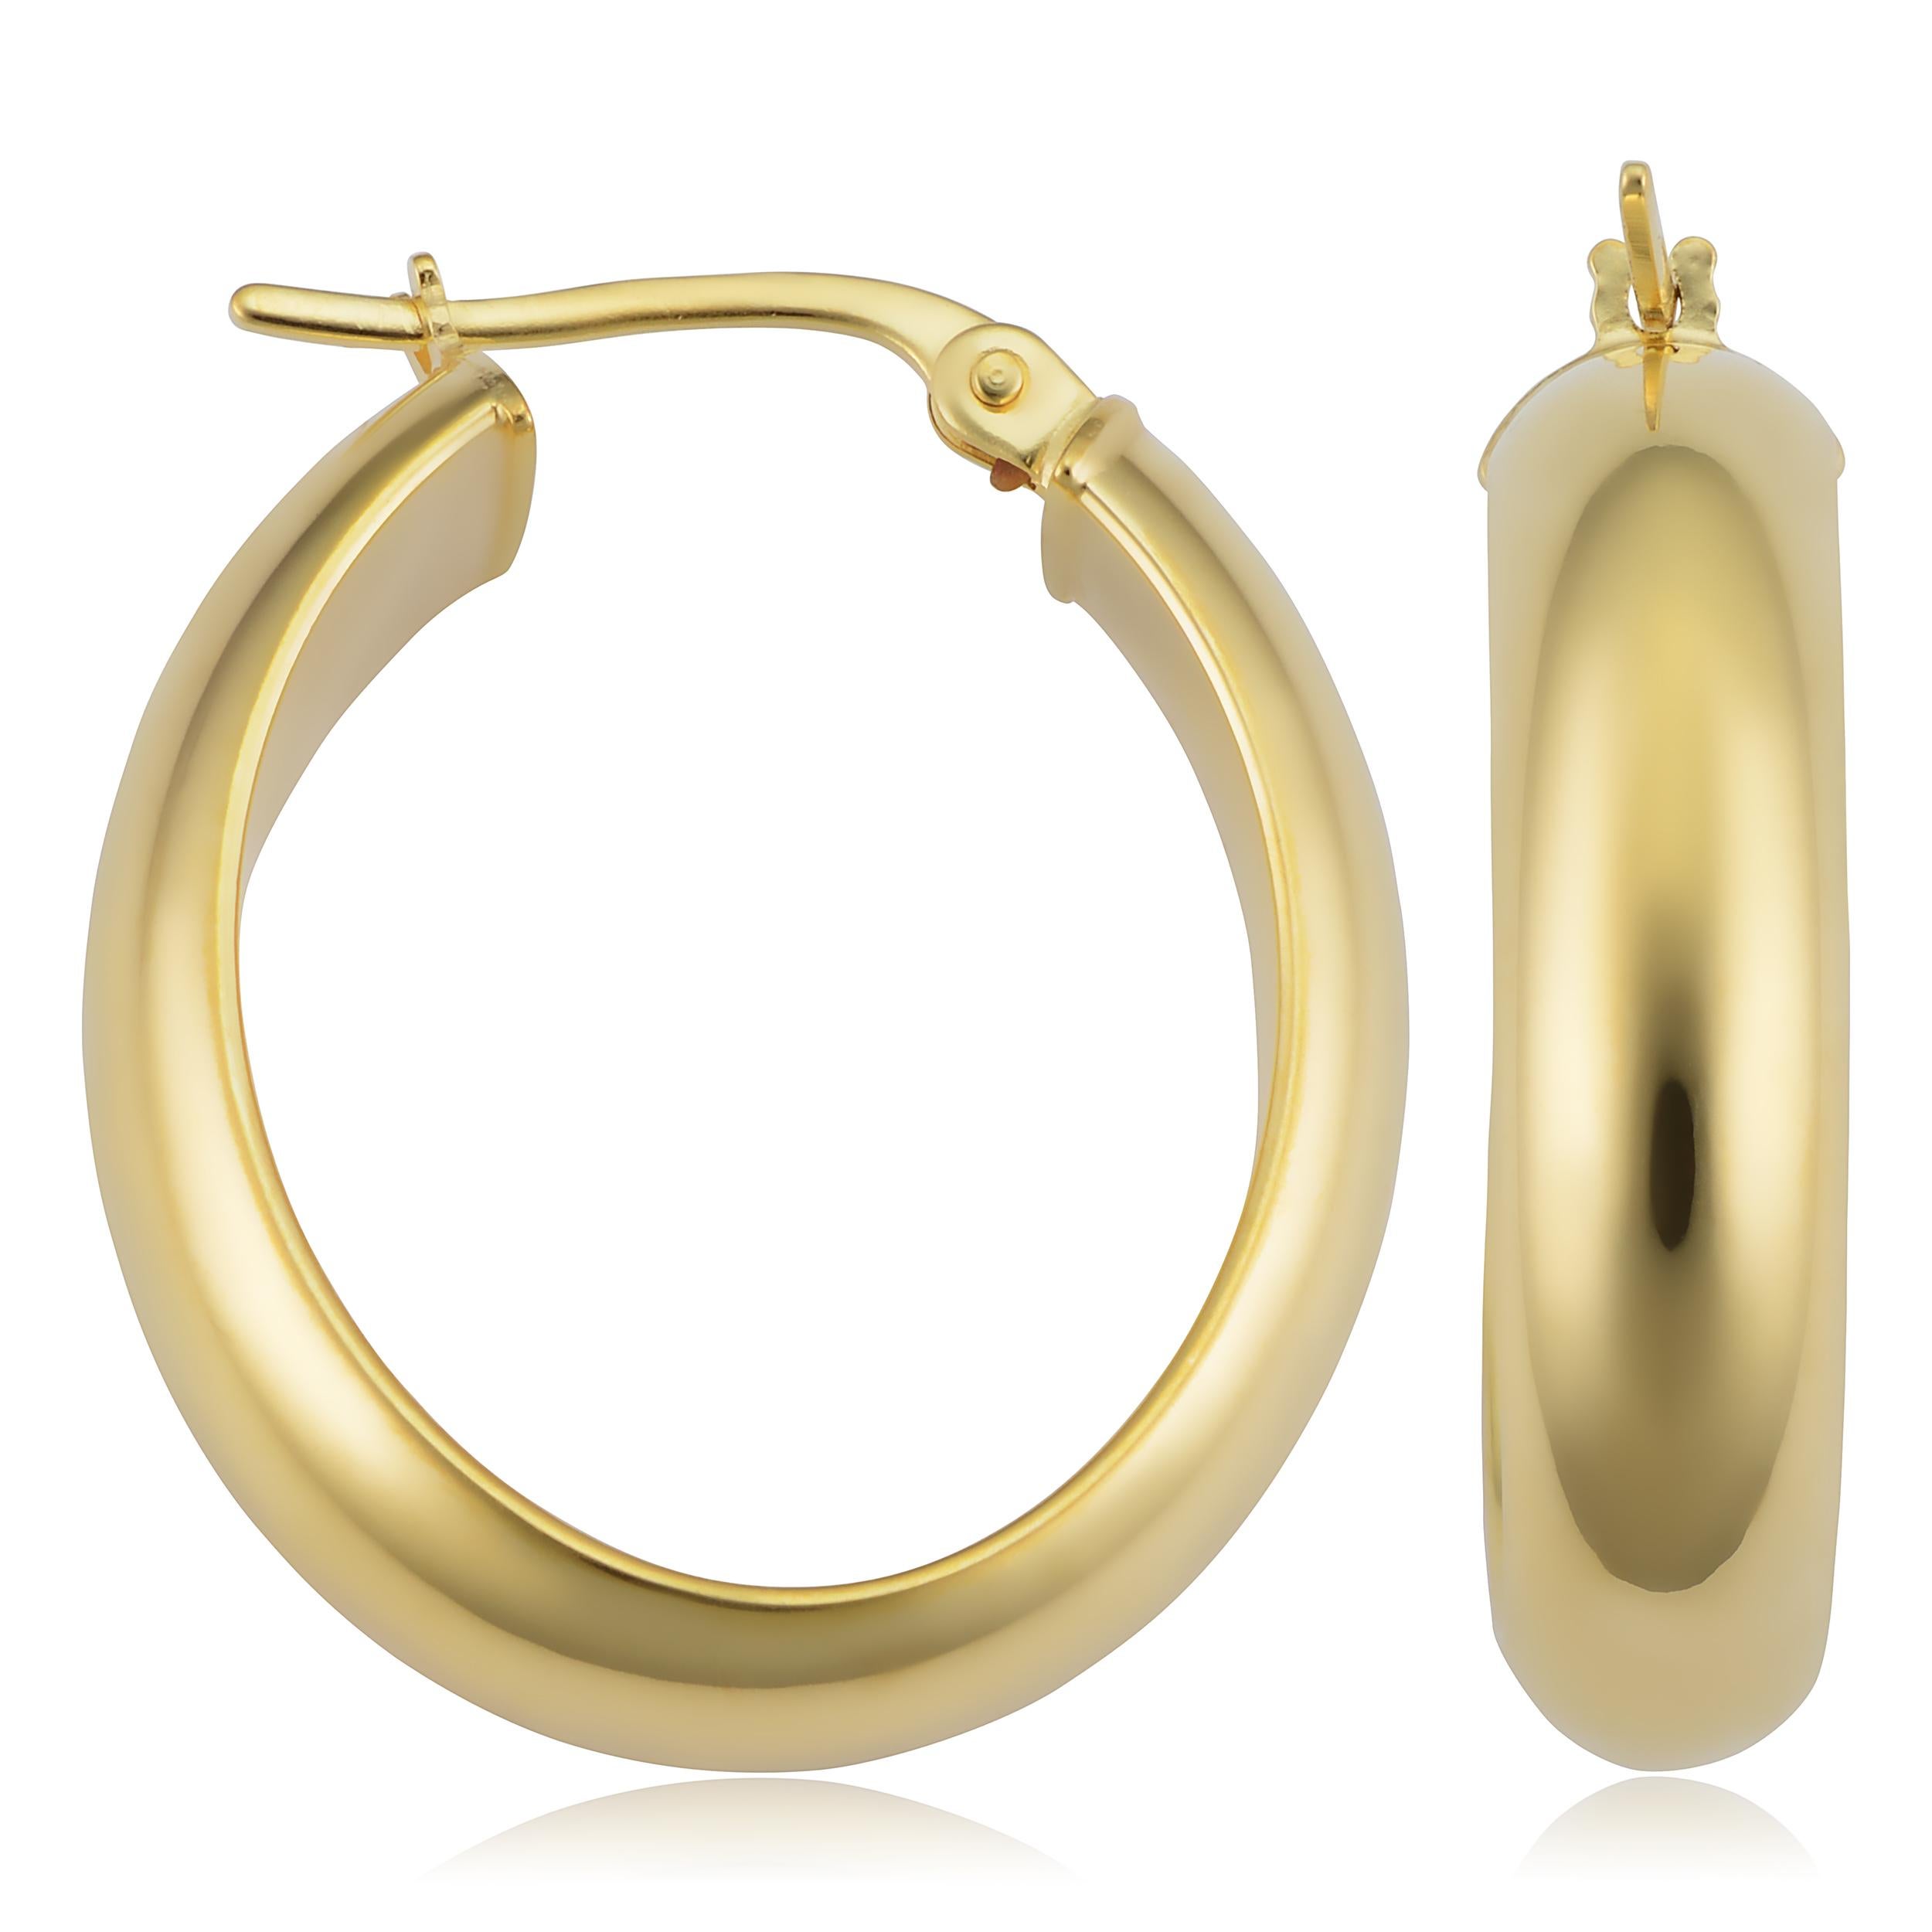 14K YELLOW GOLD OVAL SHAPE HOOP EARRINGS

-Made in Italy
-Size: 0.50 inches
-14mm

This piece is perfect for everyday wear and makes the perfect Gift! 

We certify that this is an authentic piece of Fine jewelry. Every piece is crafted with the